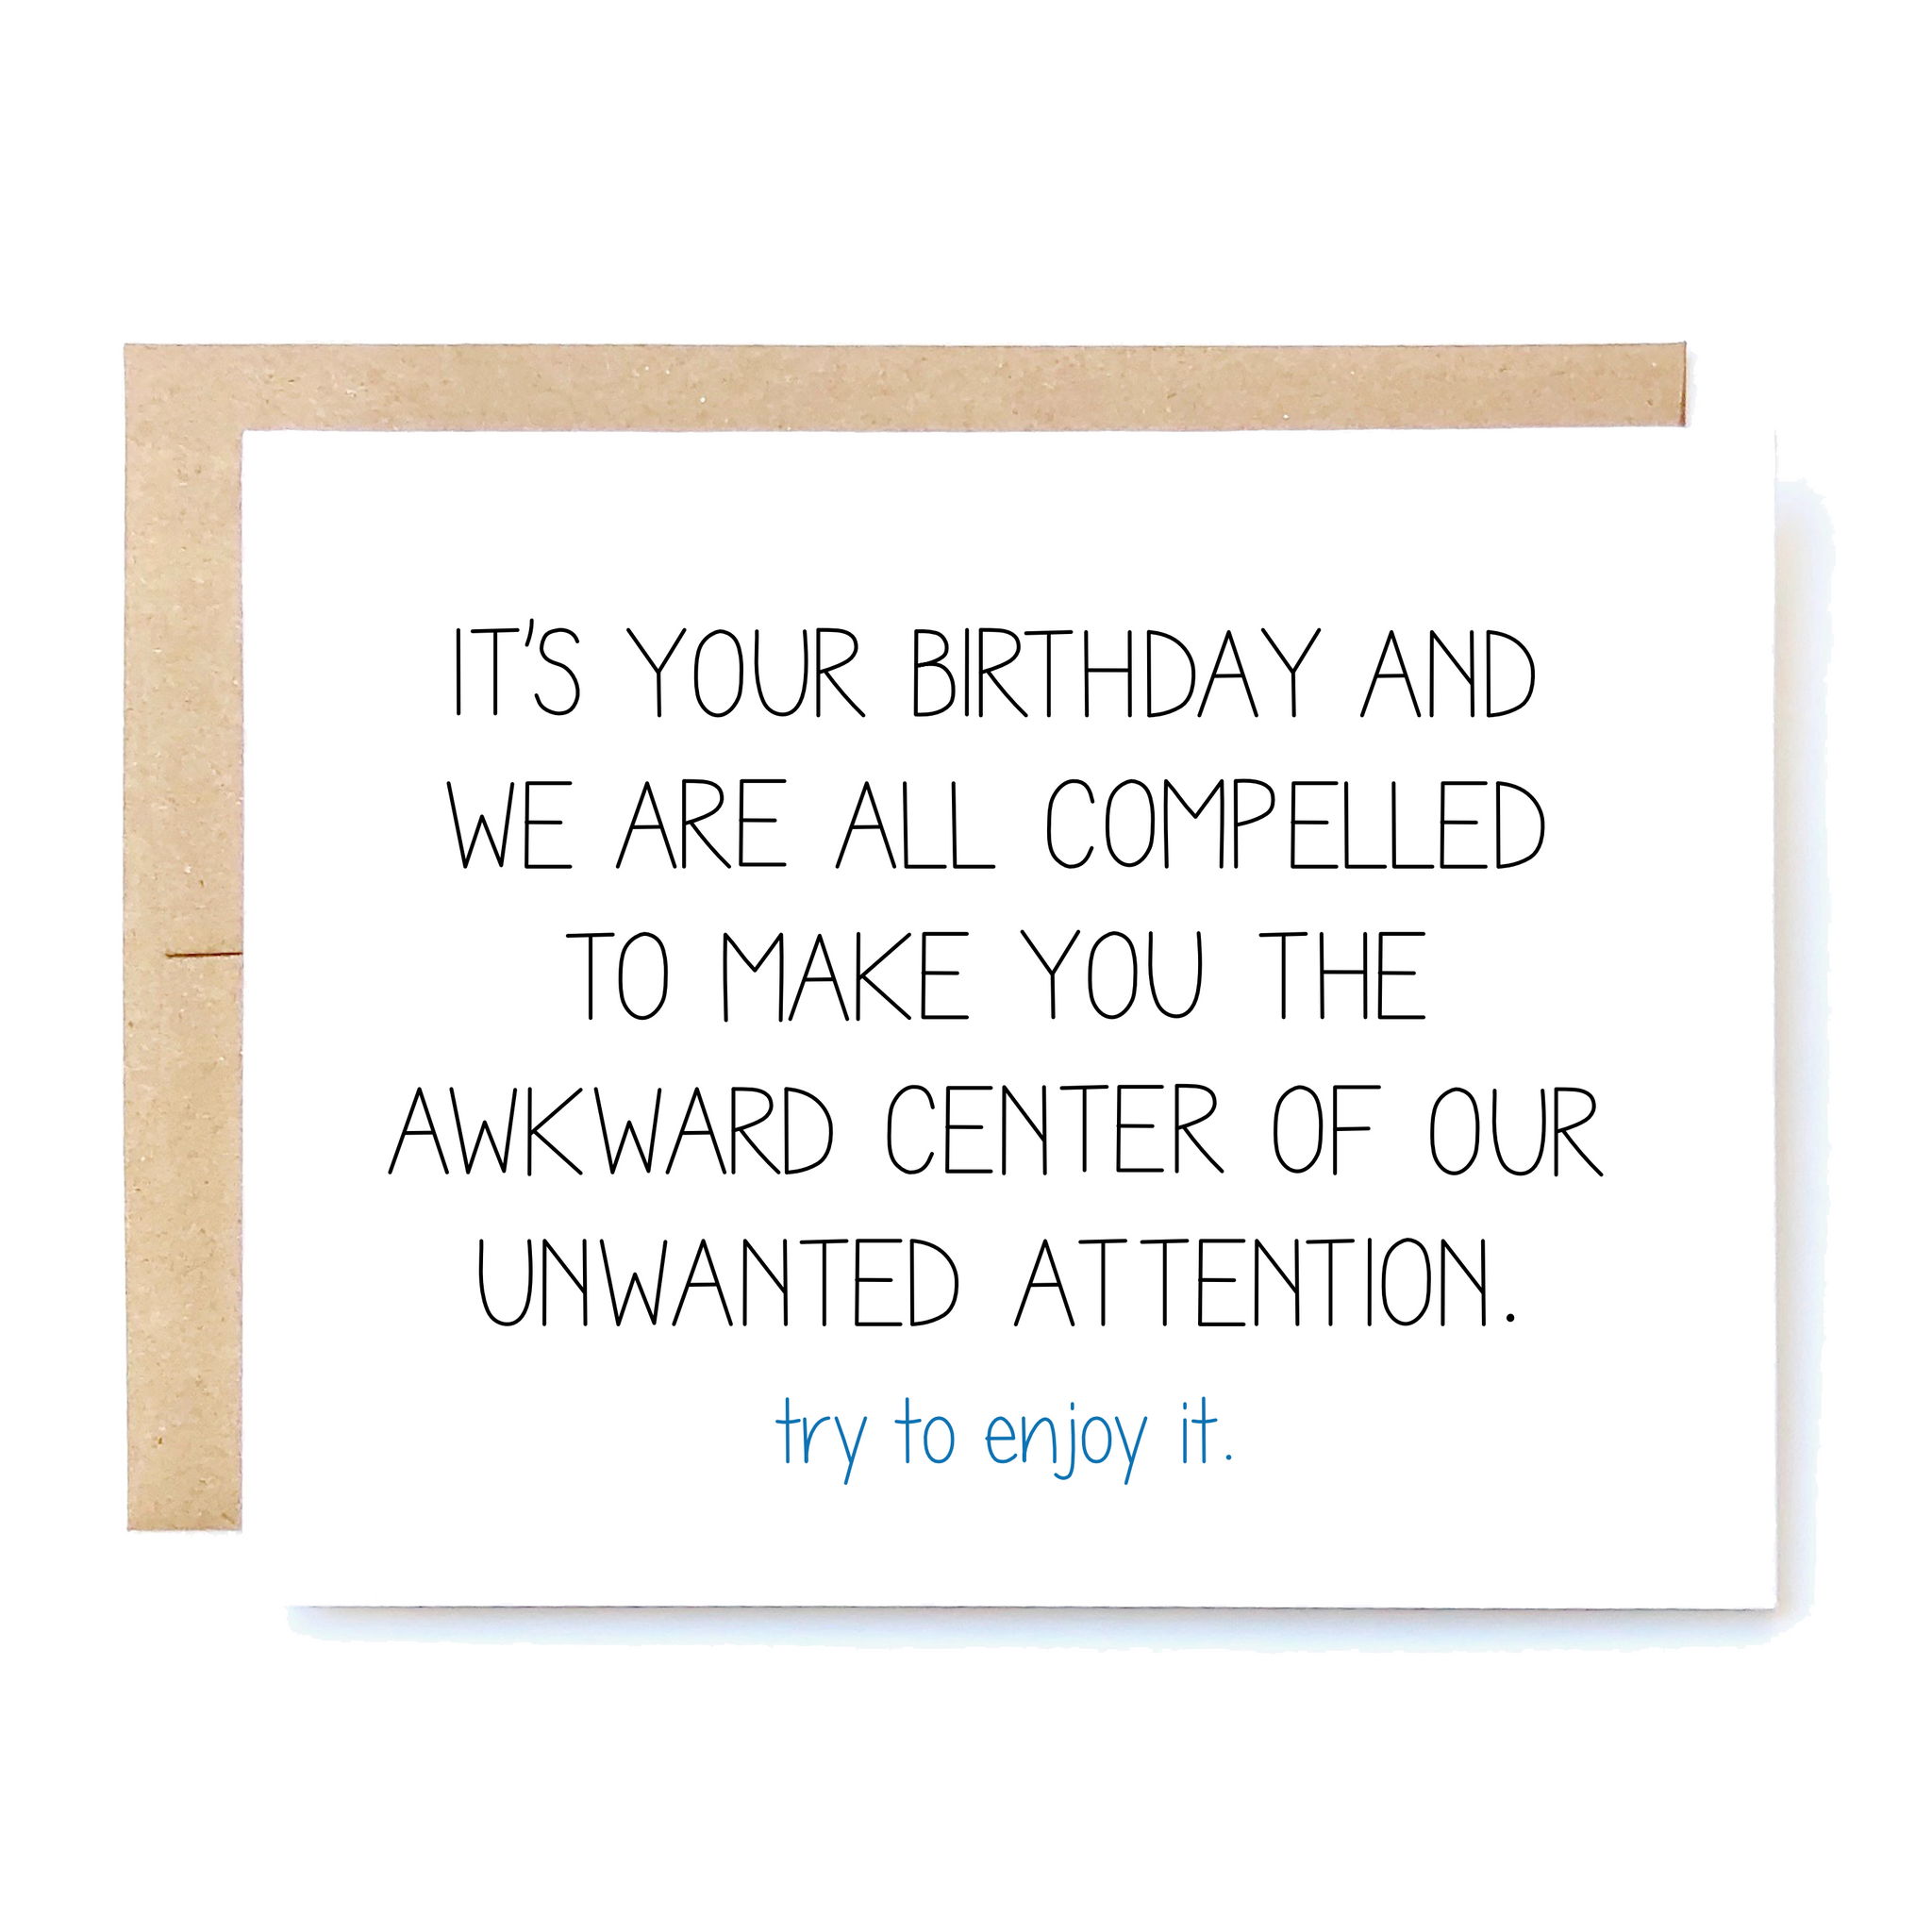 Card Front: It's your birthday and we are all compelled to make you the awkward center of our unwanted attention.  Try to enjoy it.